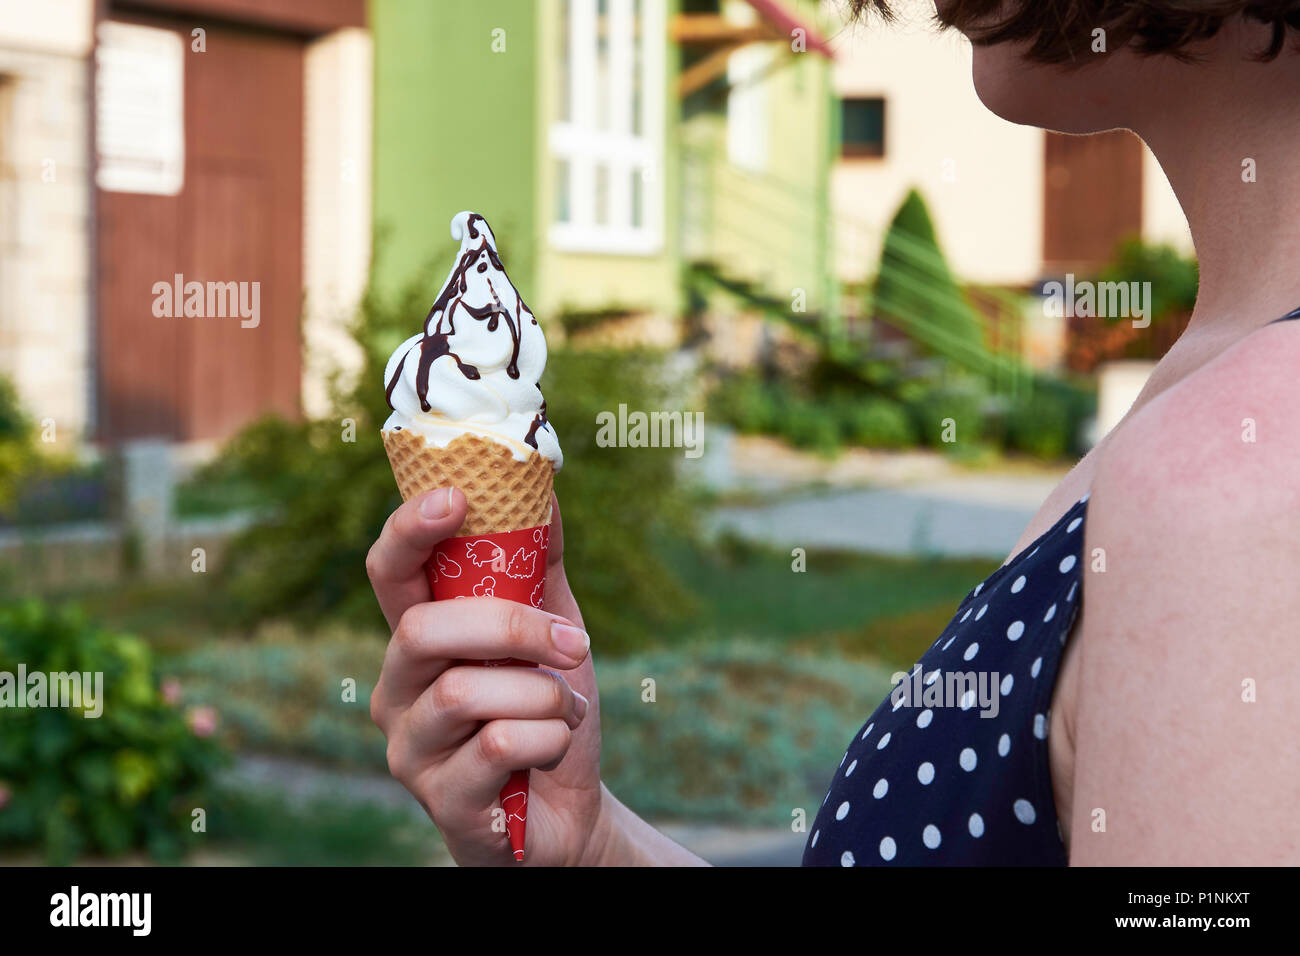 Young woman holding ice cream in hands, with houses, town and trees blurred in the background Stock Photo